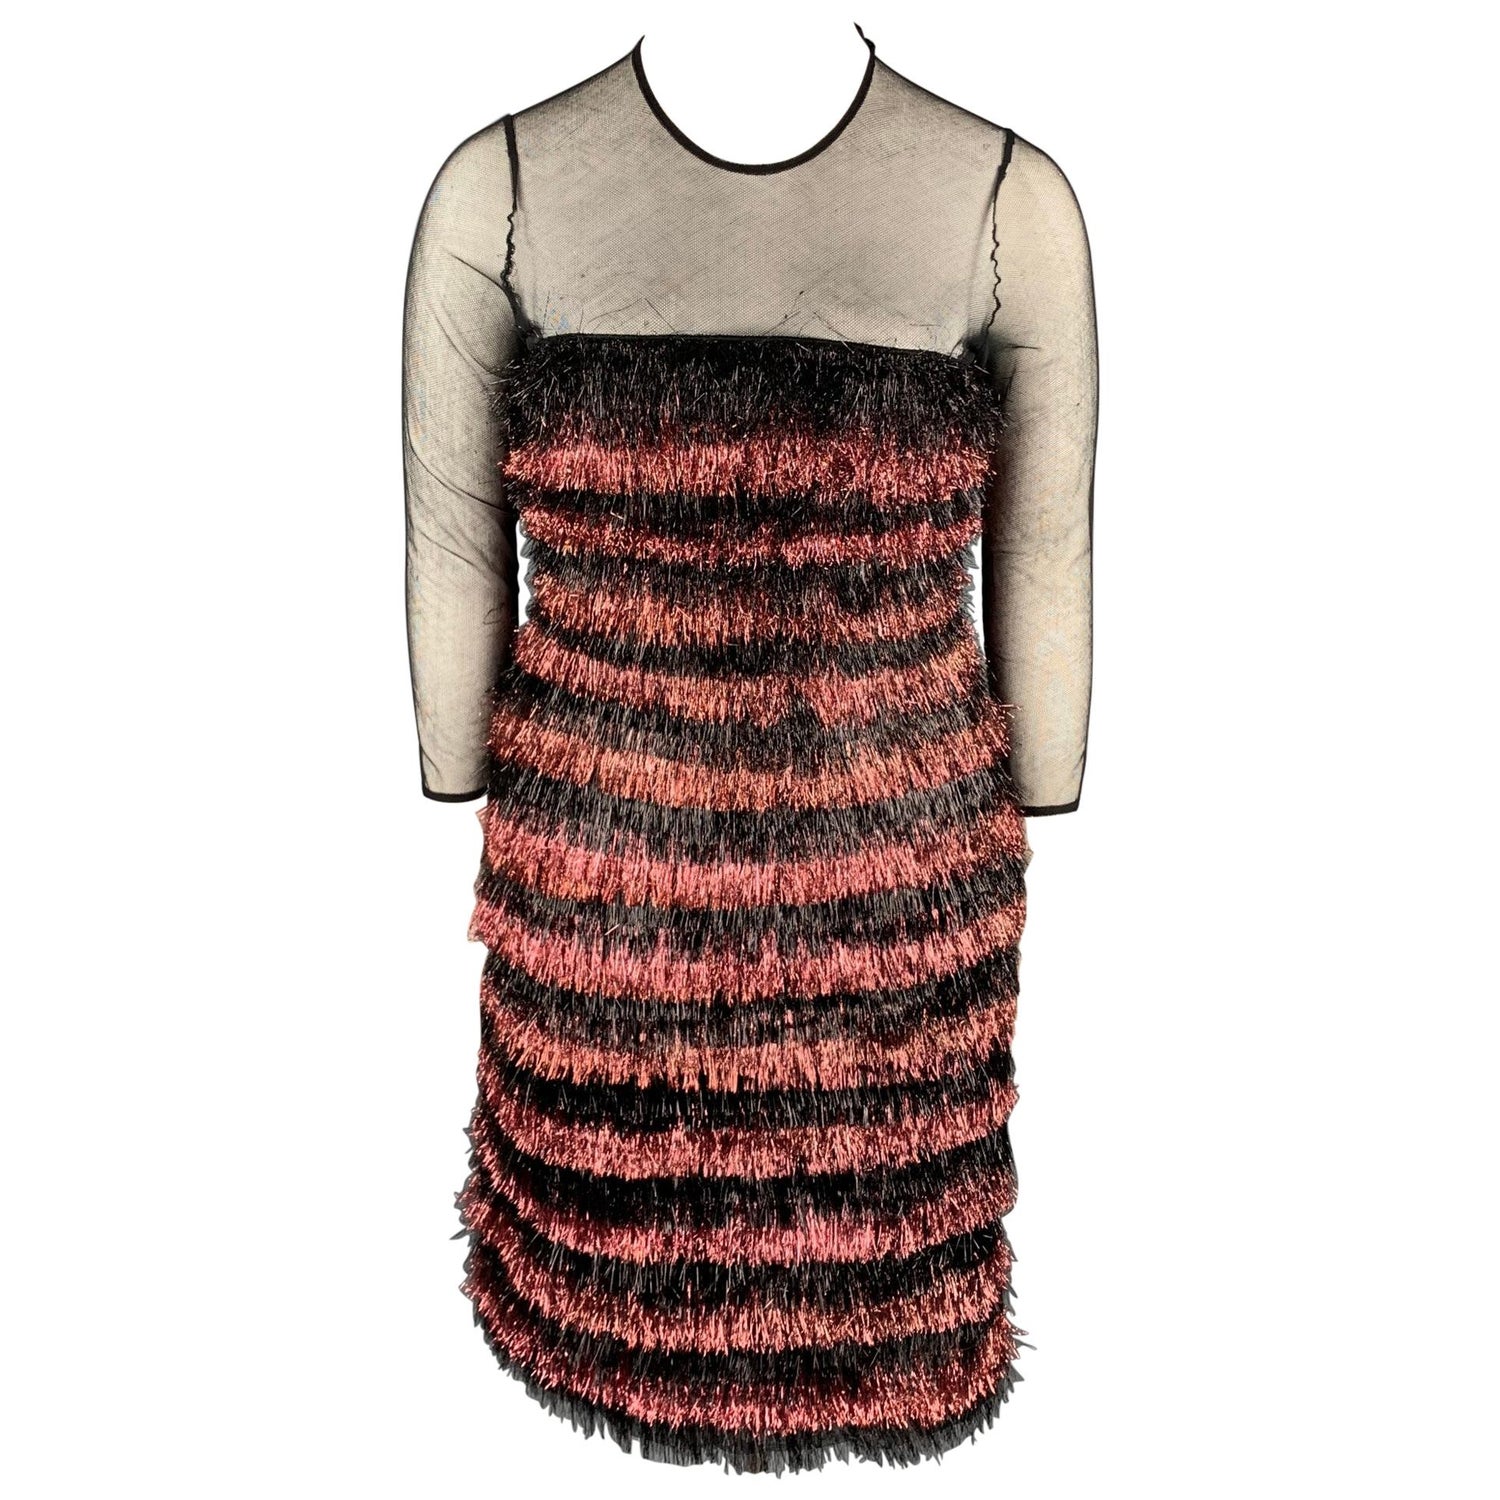 Burberry Prorsum: Dresses, Jackets & More - 34 For Sale at 1stdibs